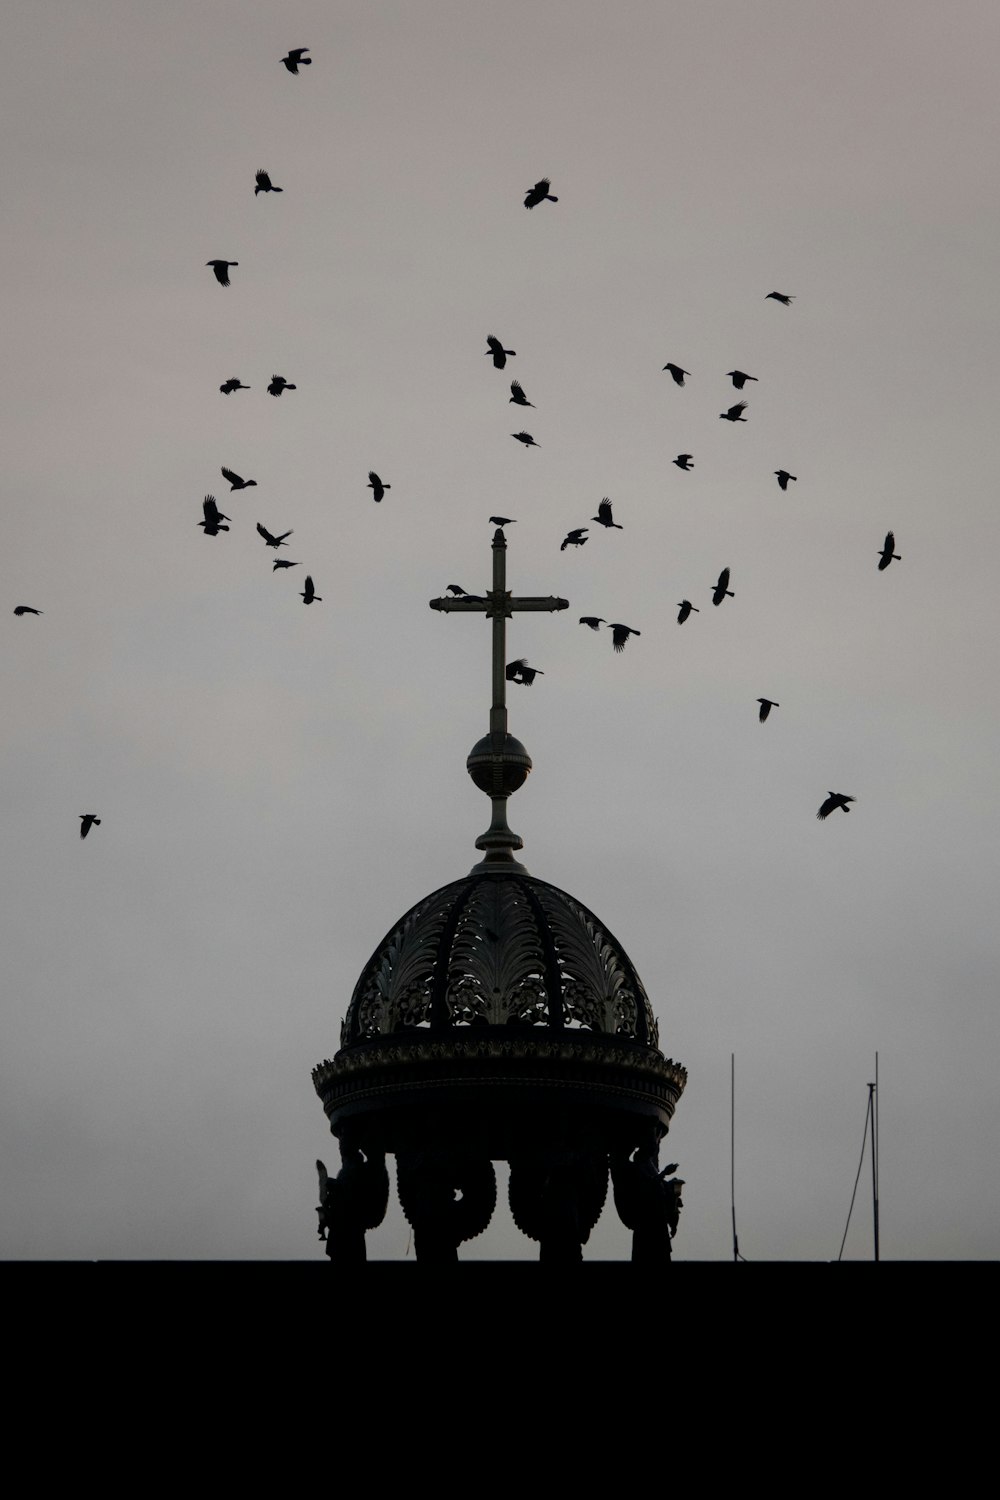 a group of birds flying over a domed building